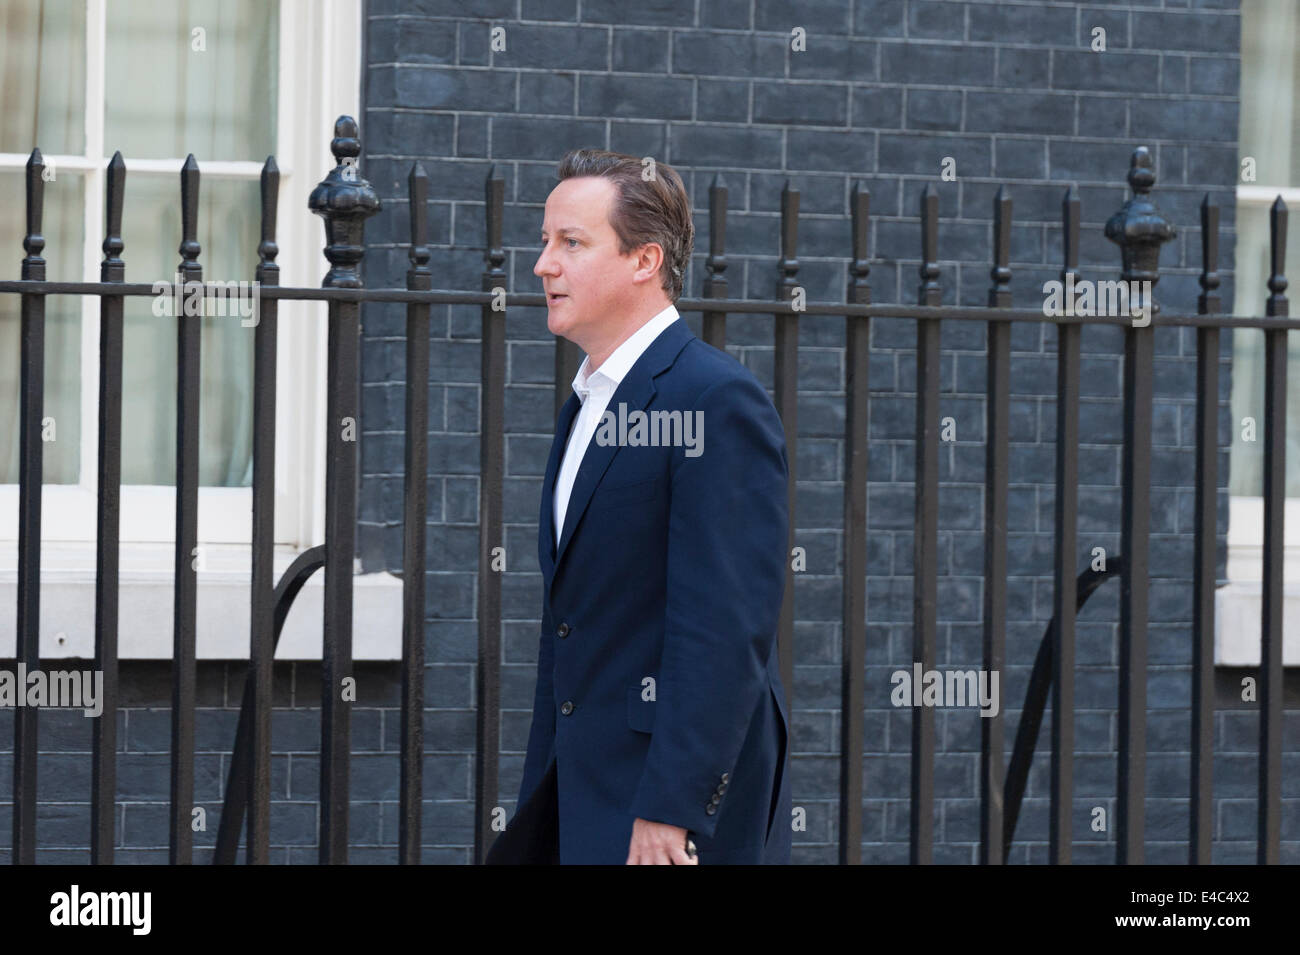 Downing Street, London, UK. 8th July 2014. UK government ministers attend 10 Downing Street in London for the weekly Cabinet Meeting. Pictured: DAVID CAMERON MP - Prime Minister. Credit:  Lee Thomas/Alamy Live News Stock Photo